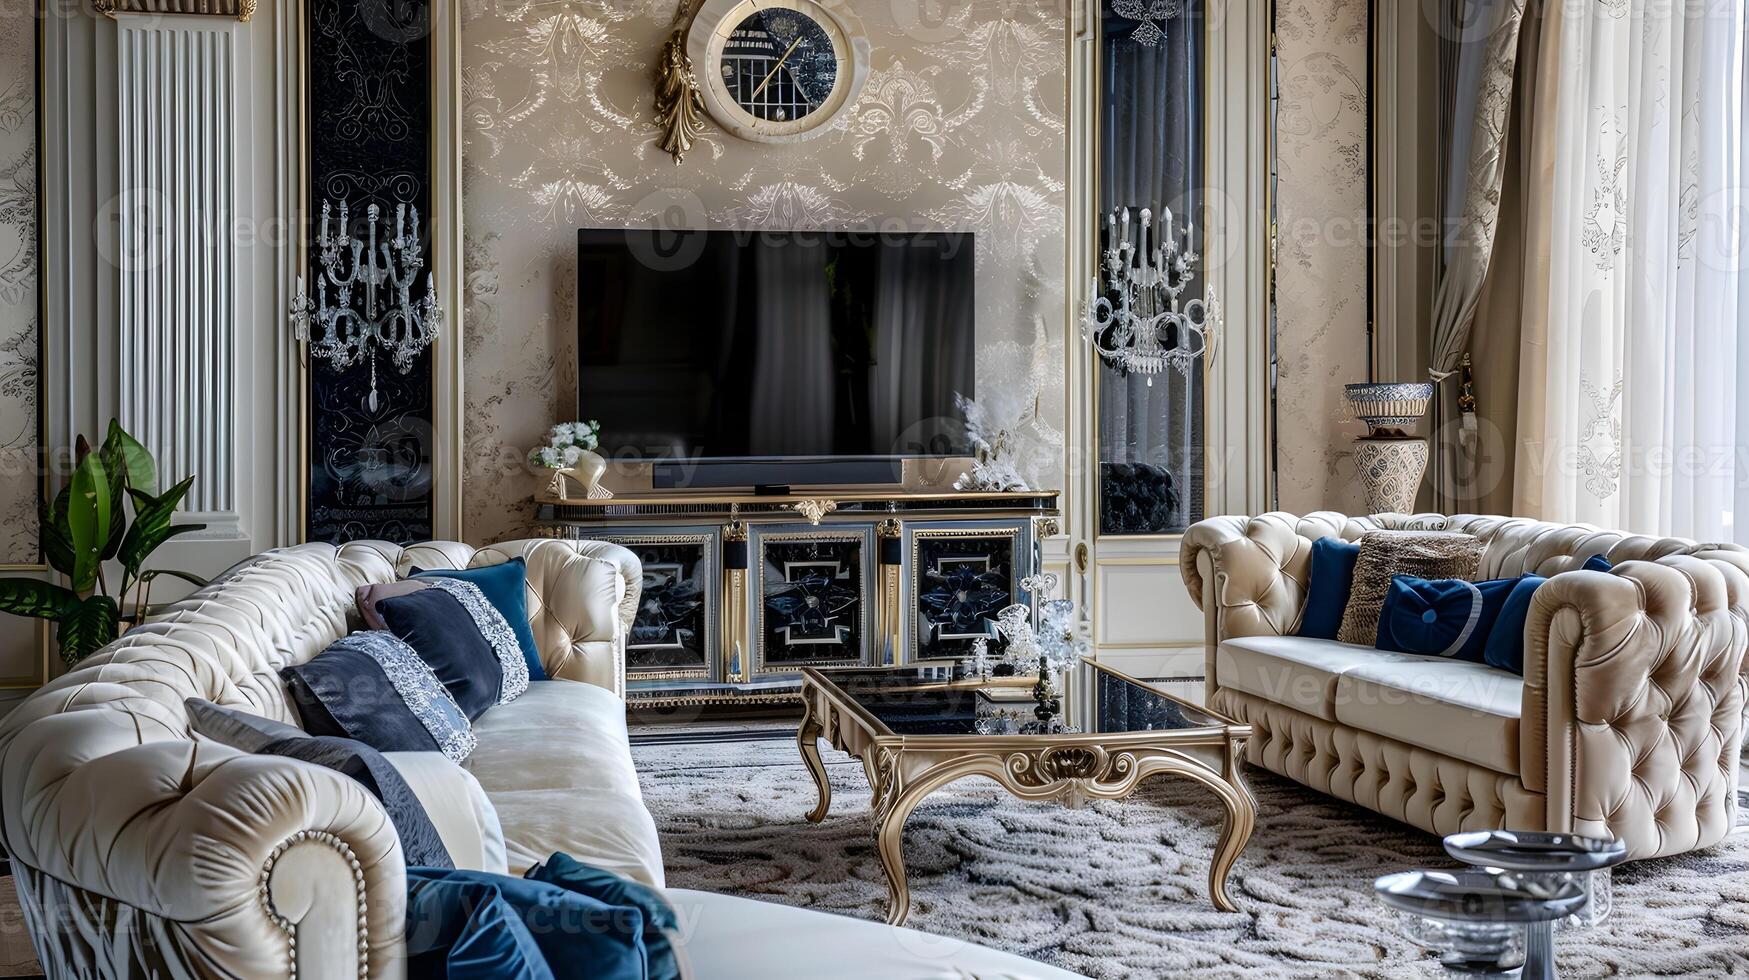 Ultimate Elegance - A Luxury Living Room Featuring Dior's Opulent Intricacies photo